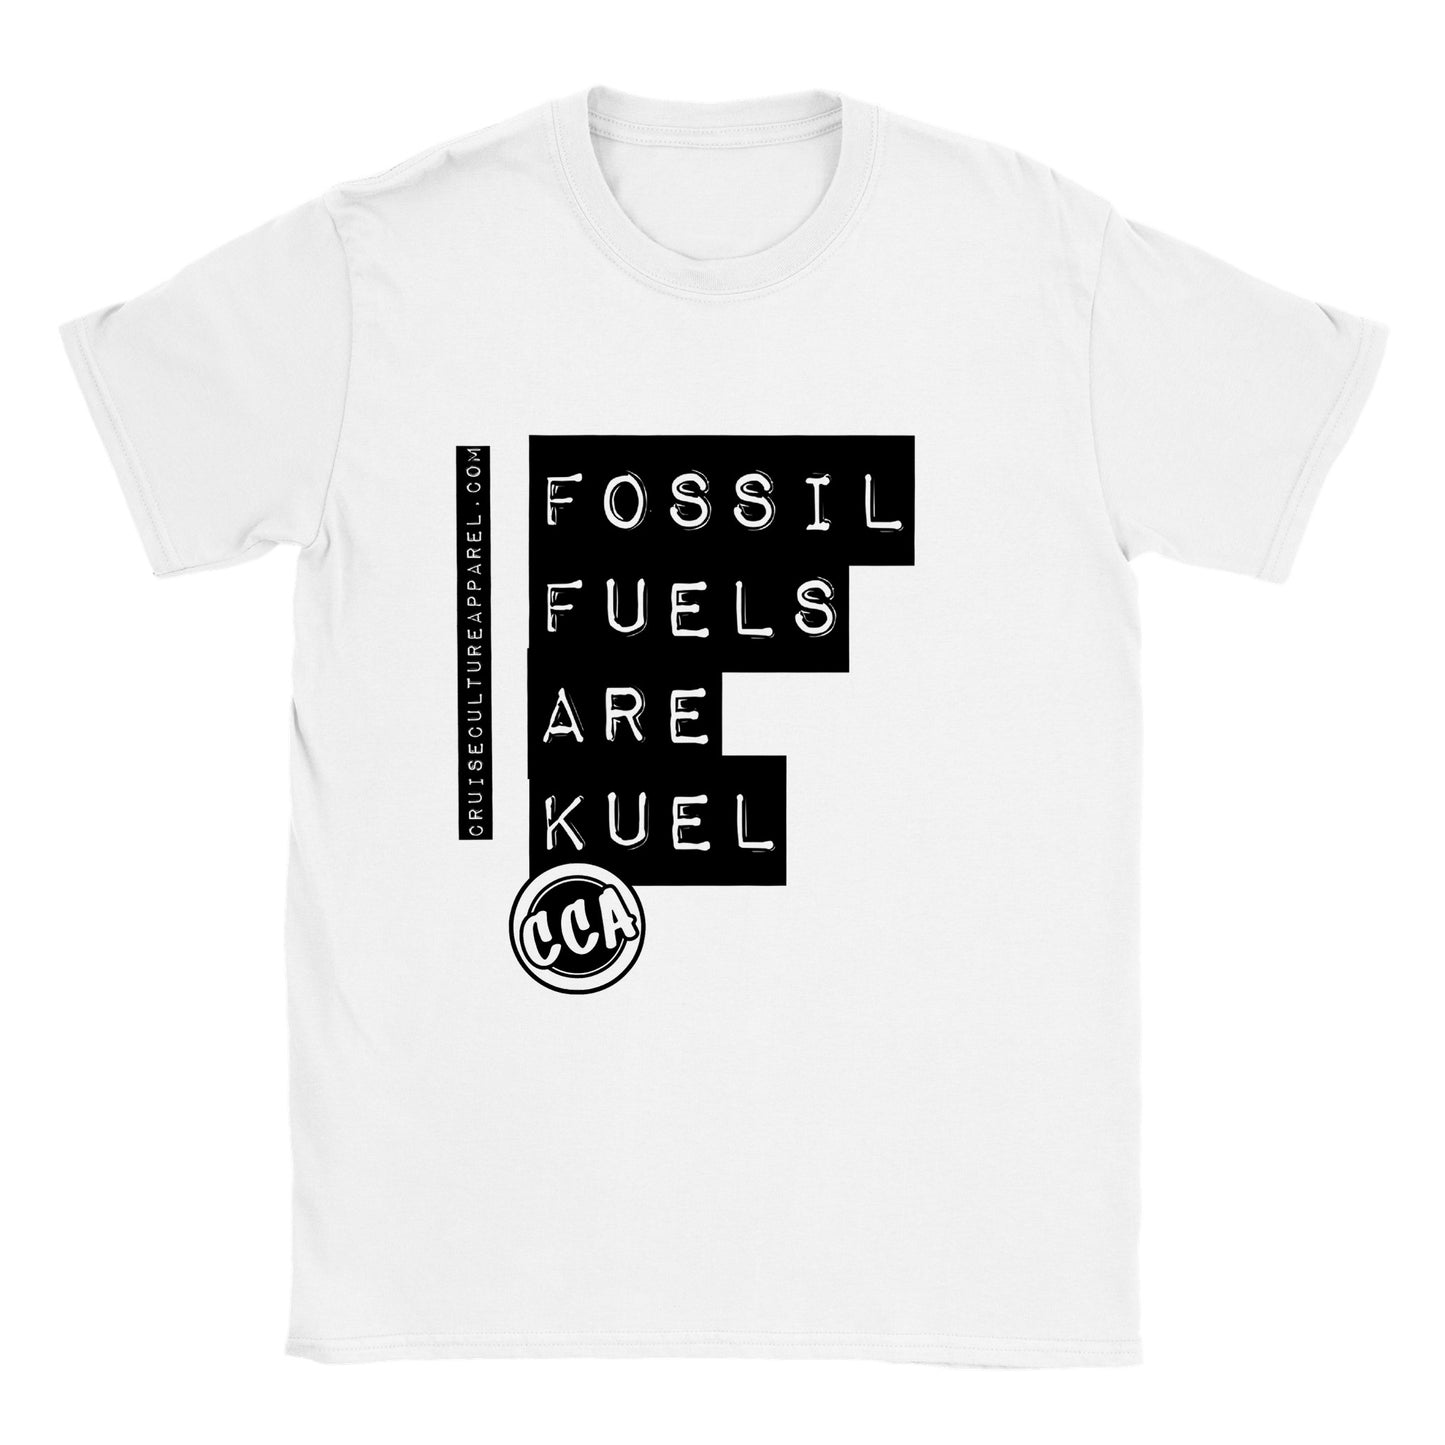 Fossil Fuels are Kuel